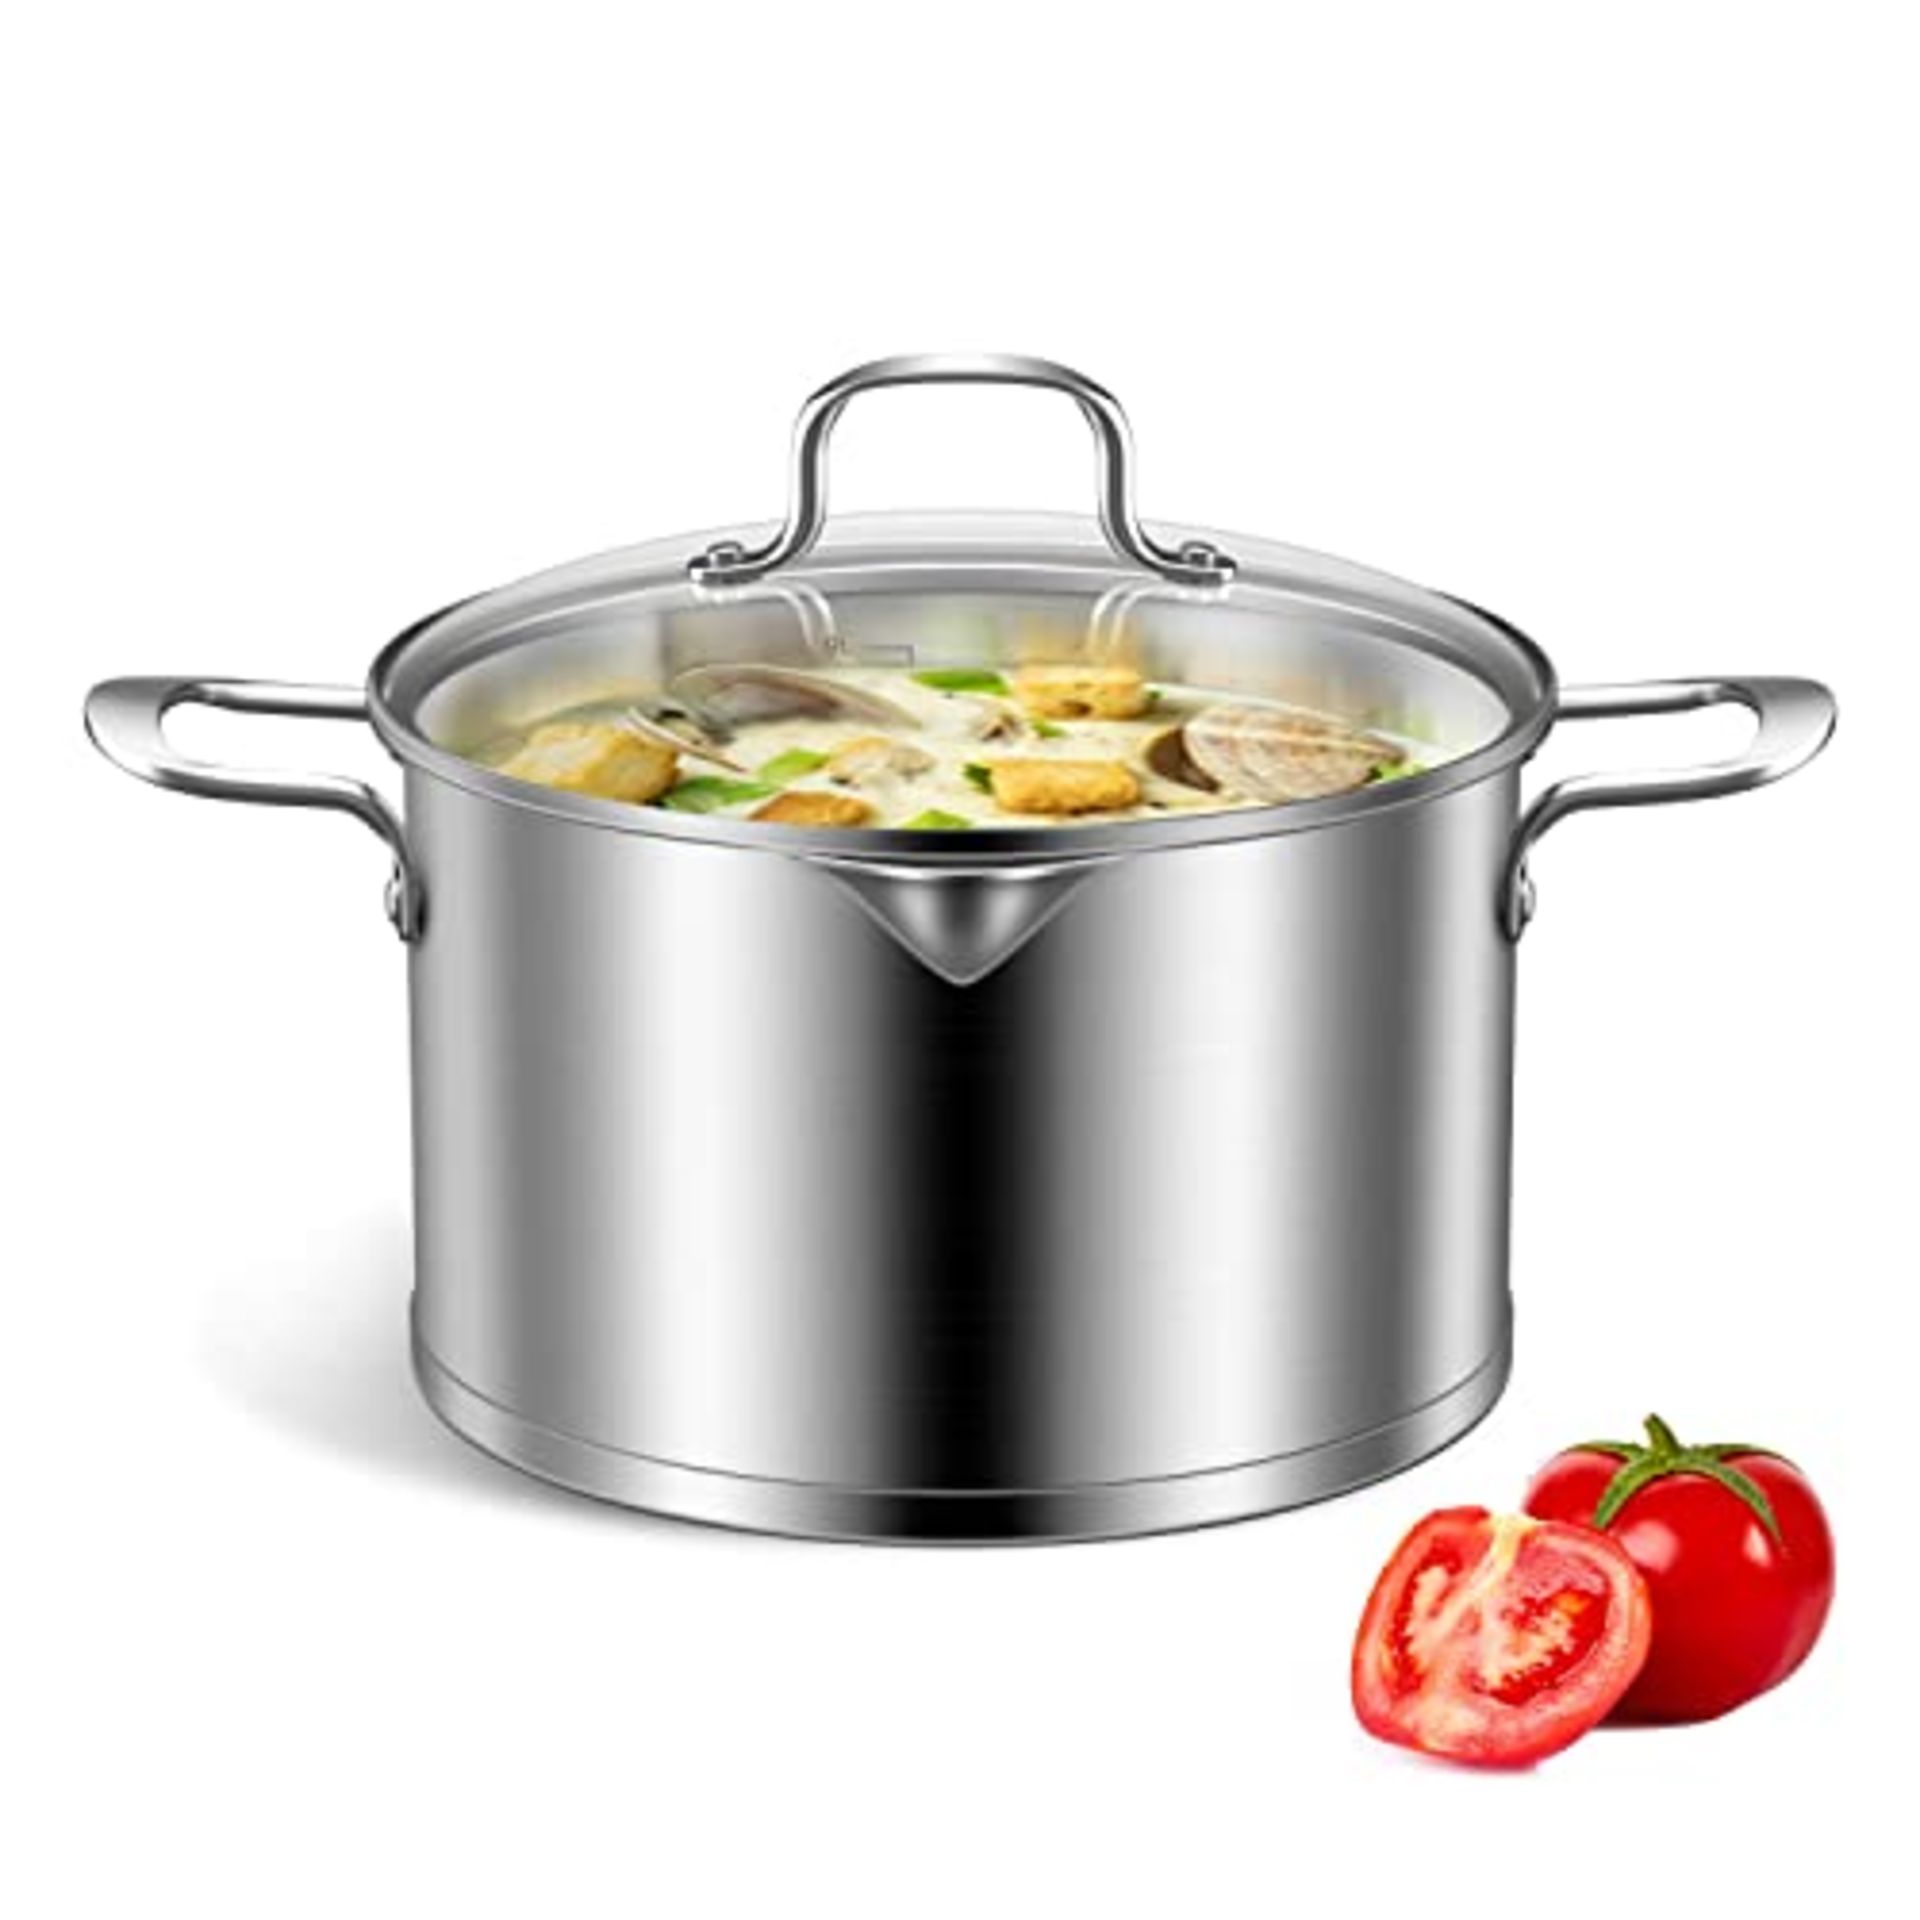 RRP £57.07 Lio SHAAR 9 litres Stainless Steel Induction Stock Pot with Lid